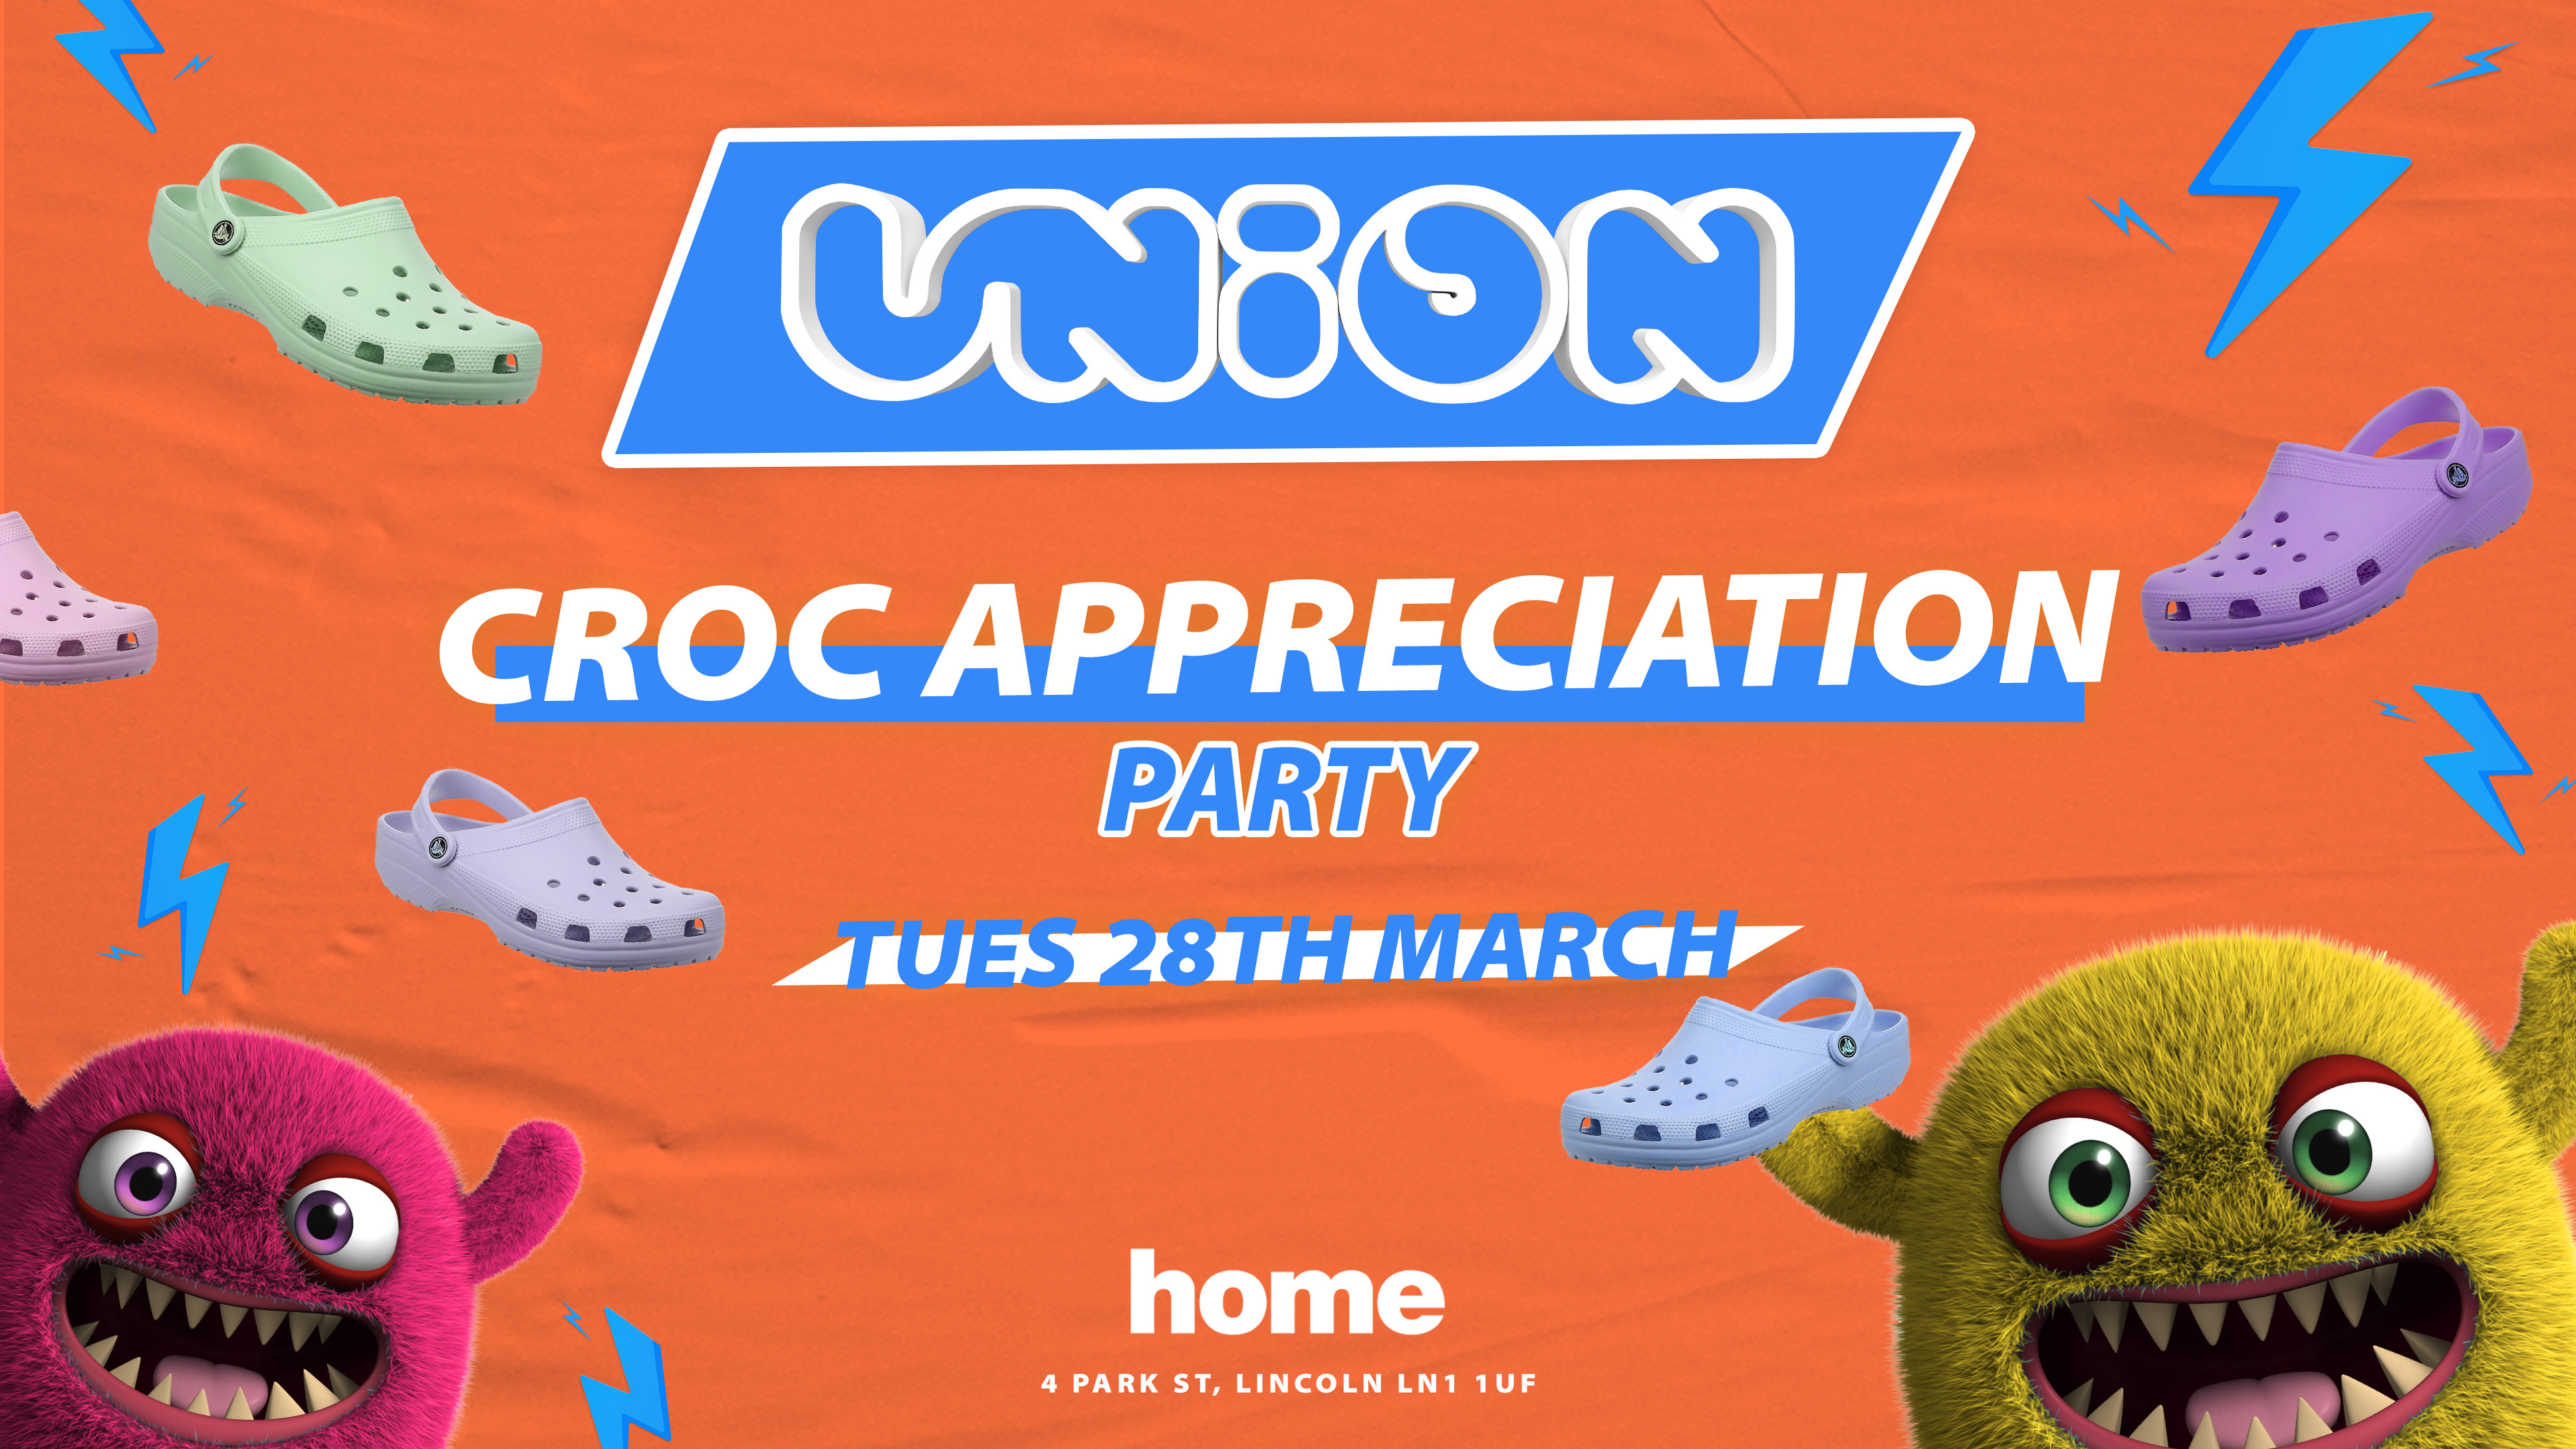 UNION TUESDAY’S ★ ﻿DOUBLES 4 SINGLES WITH EVERY TICKET ★ THE CROC APPRECIATION PARTY!